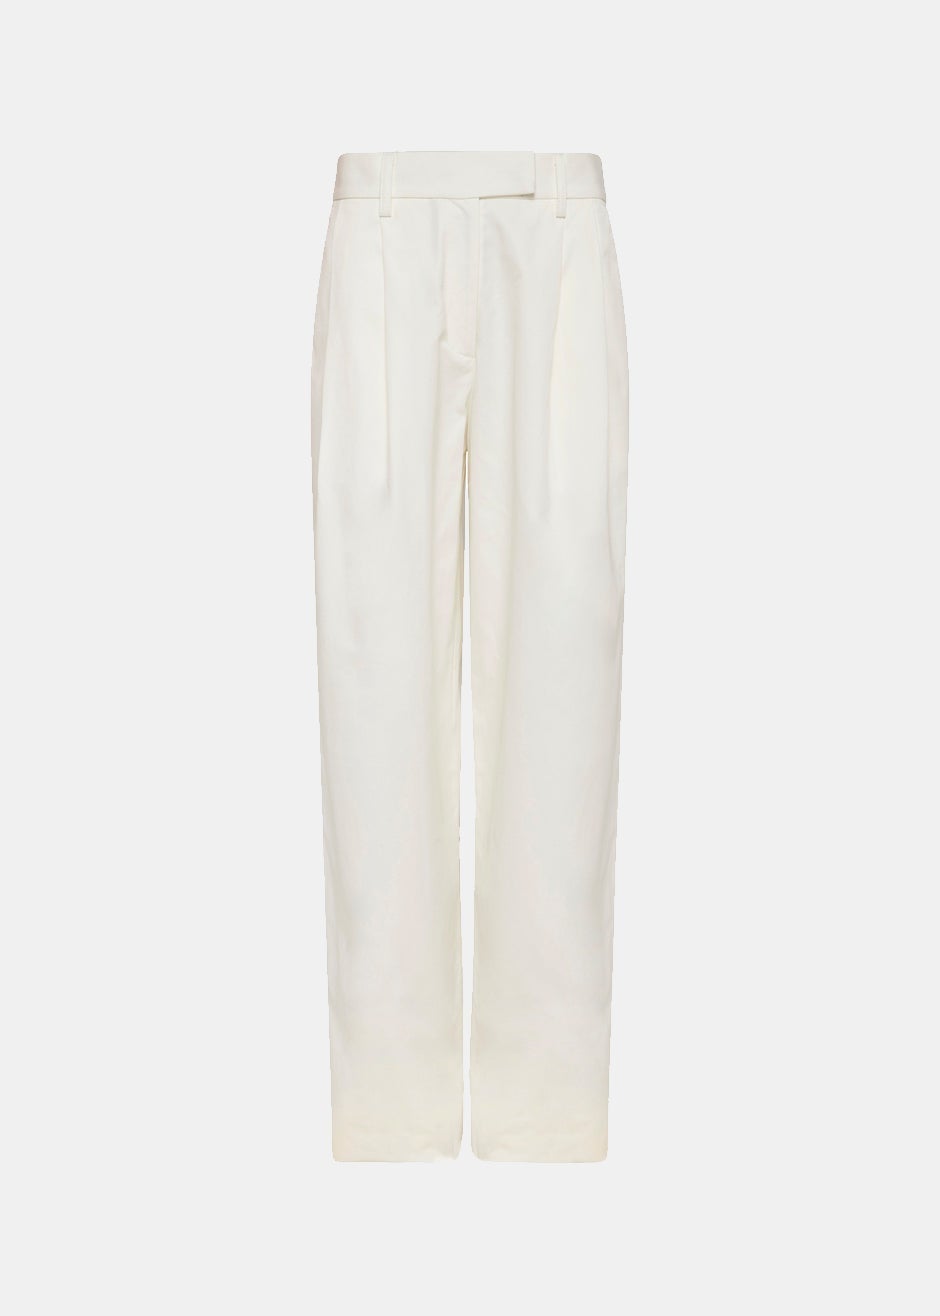 Esse Studios Tailored Cotton Trousers - Ivory - 9